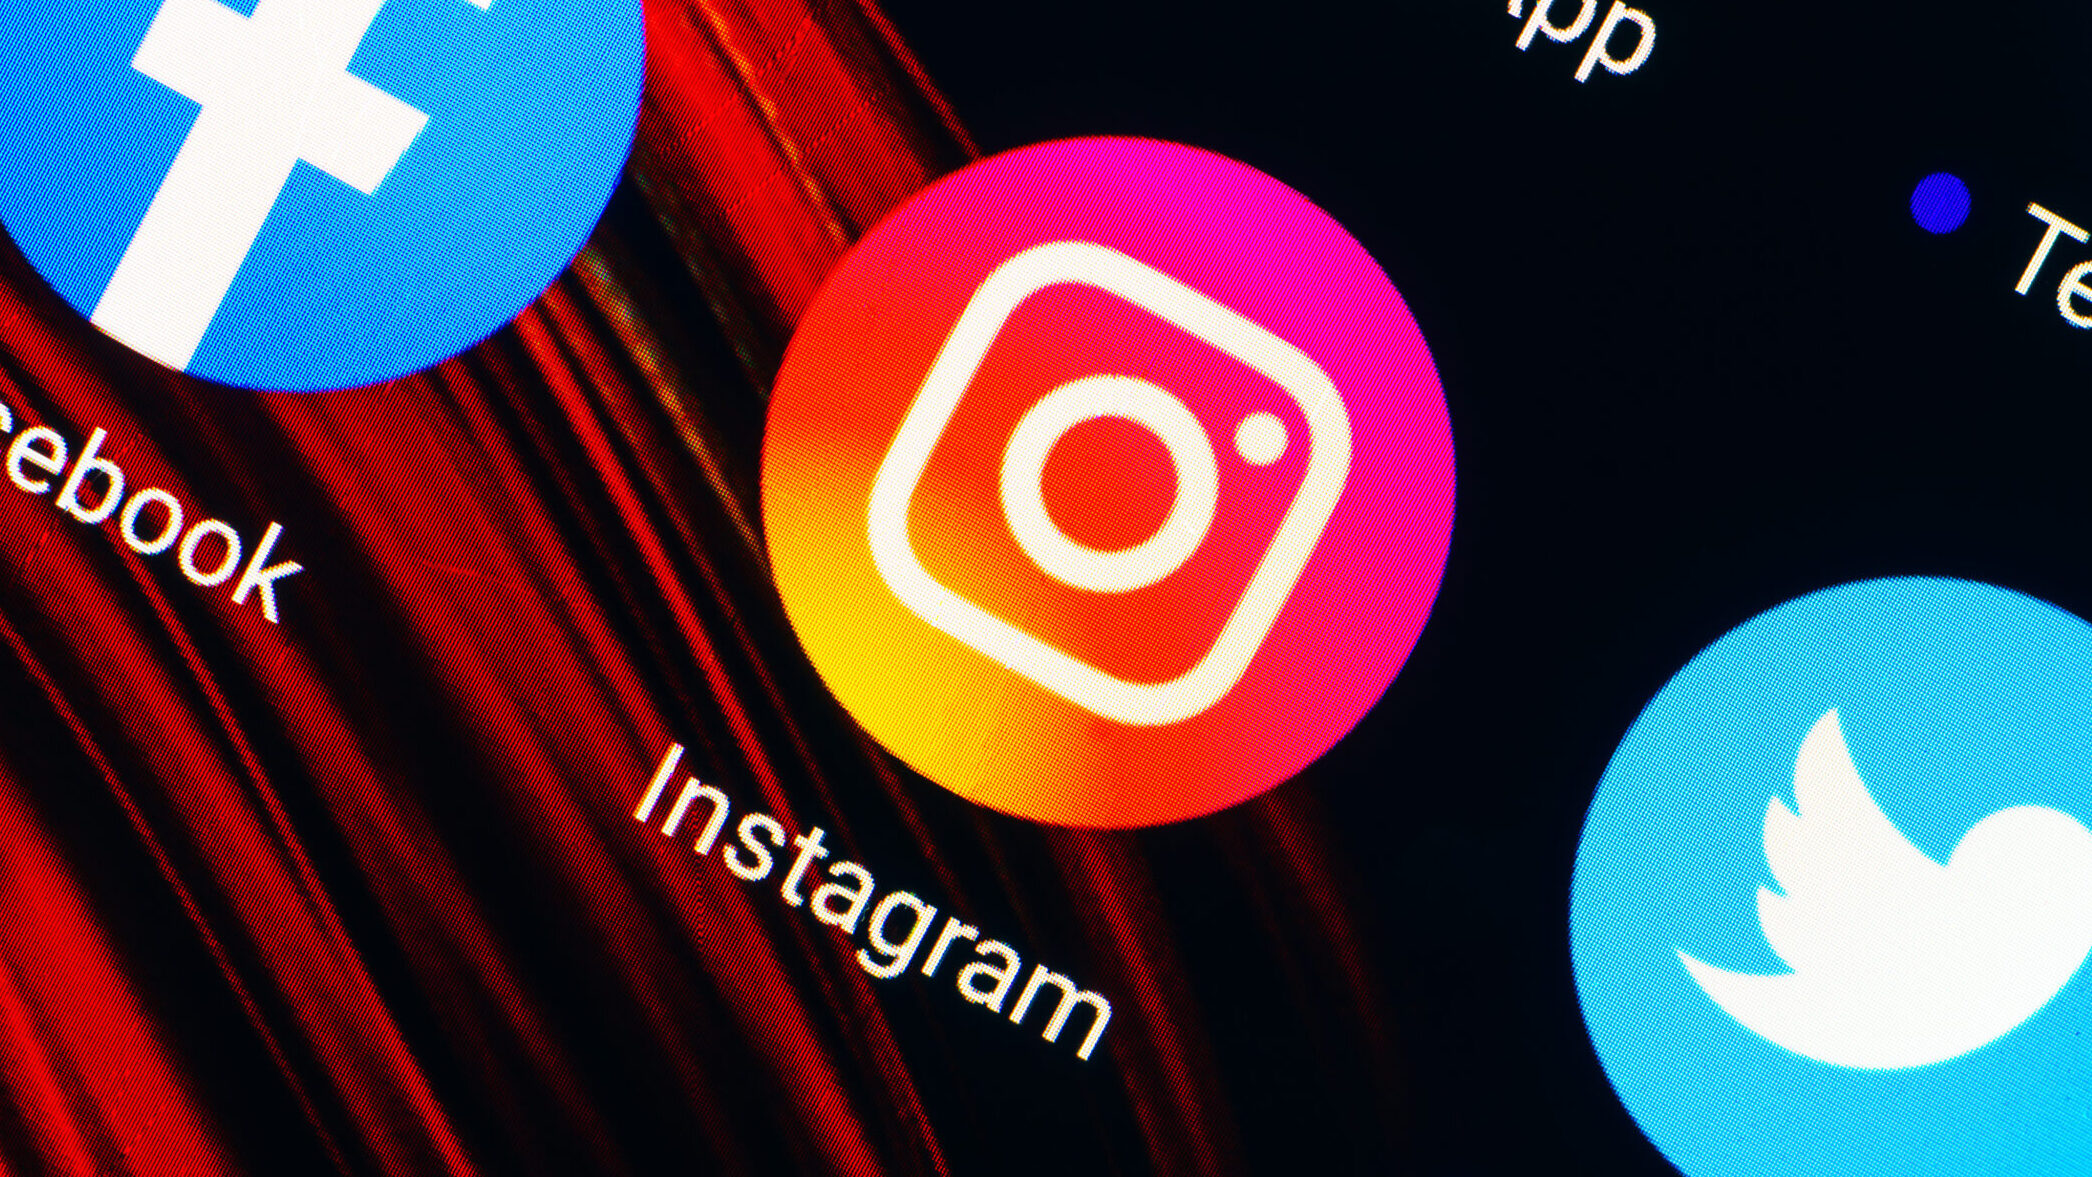 Instagram is down on May 26 2022 and it's unclear when the login issues will be resolved.